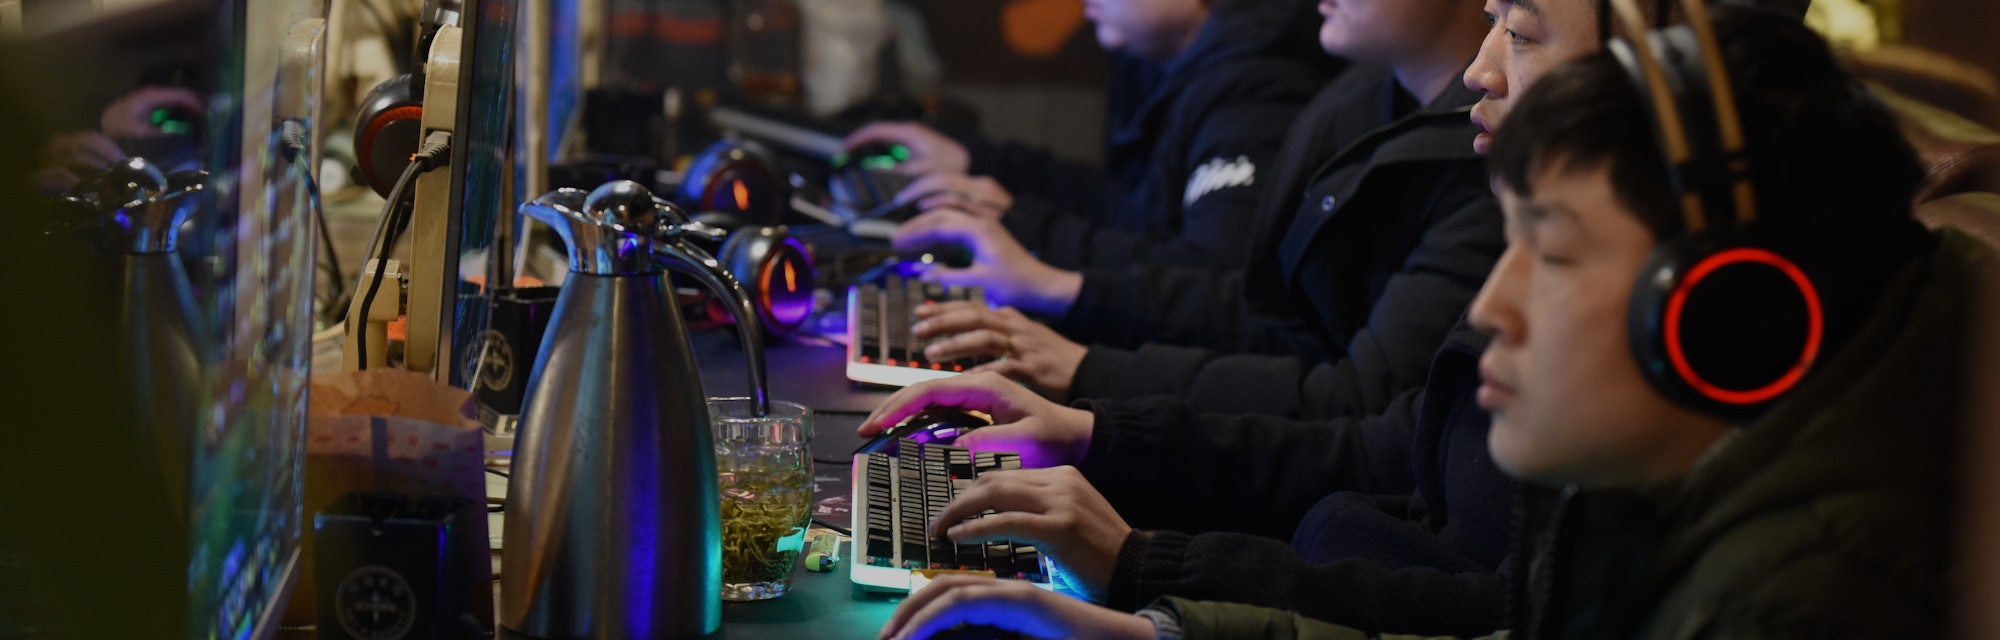 FUYANG, CHINA - MARCH 01: People play computer games at an Internet Cafe on March 1, 2019 in Fuyang,...